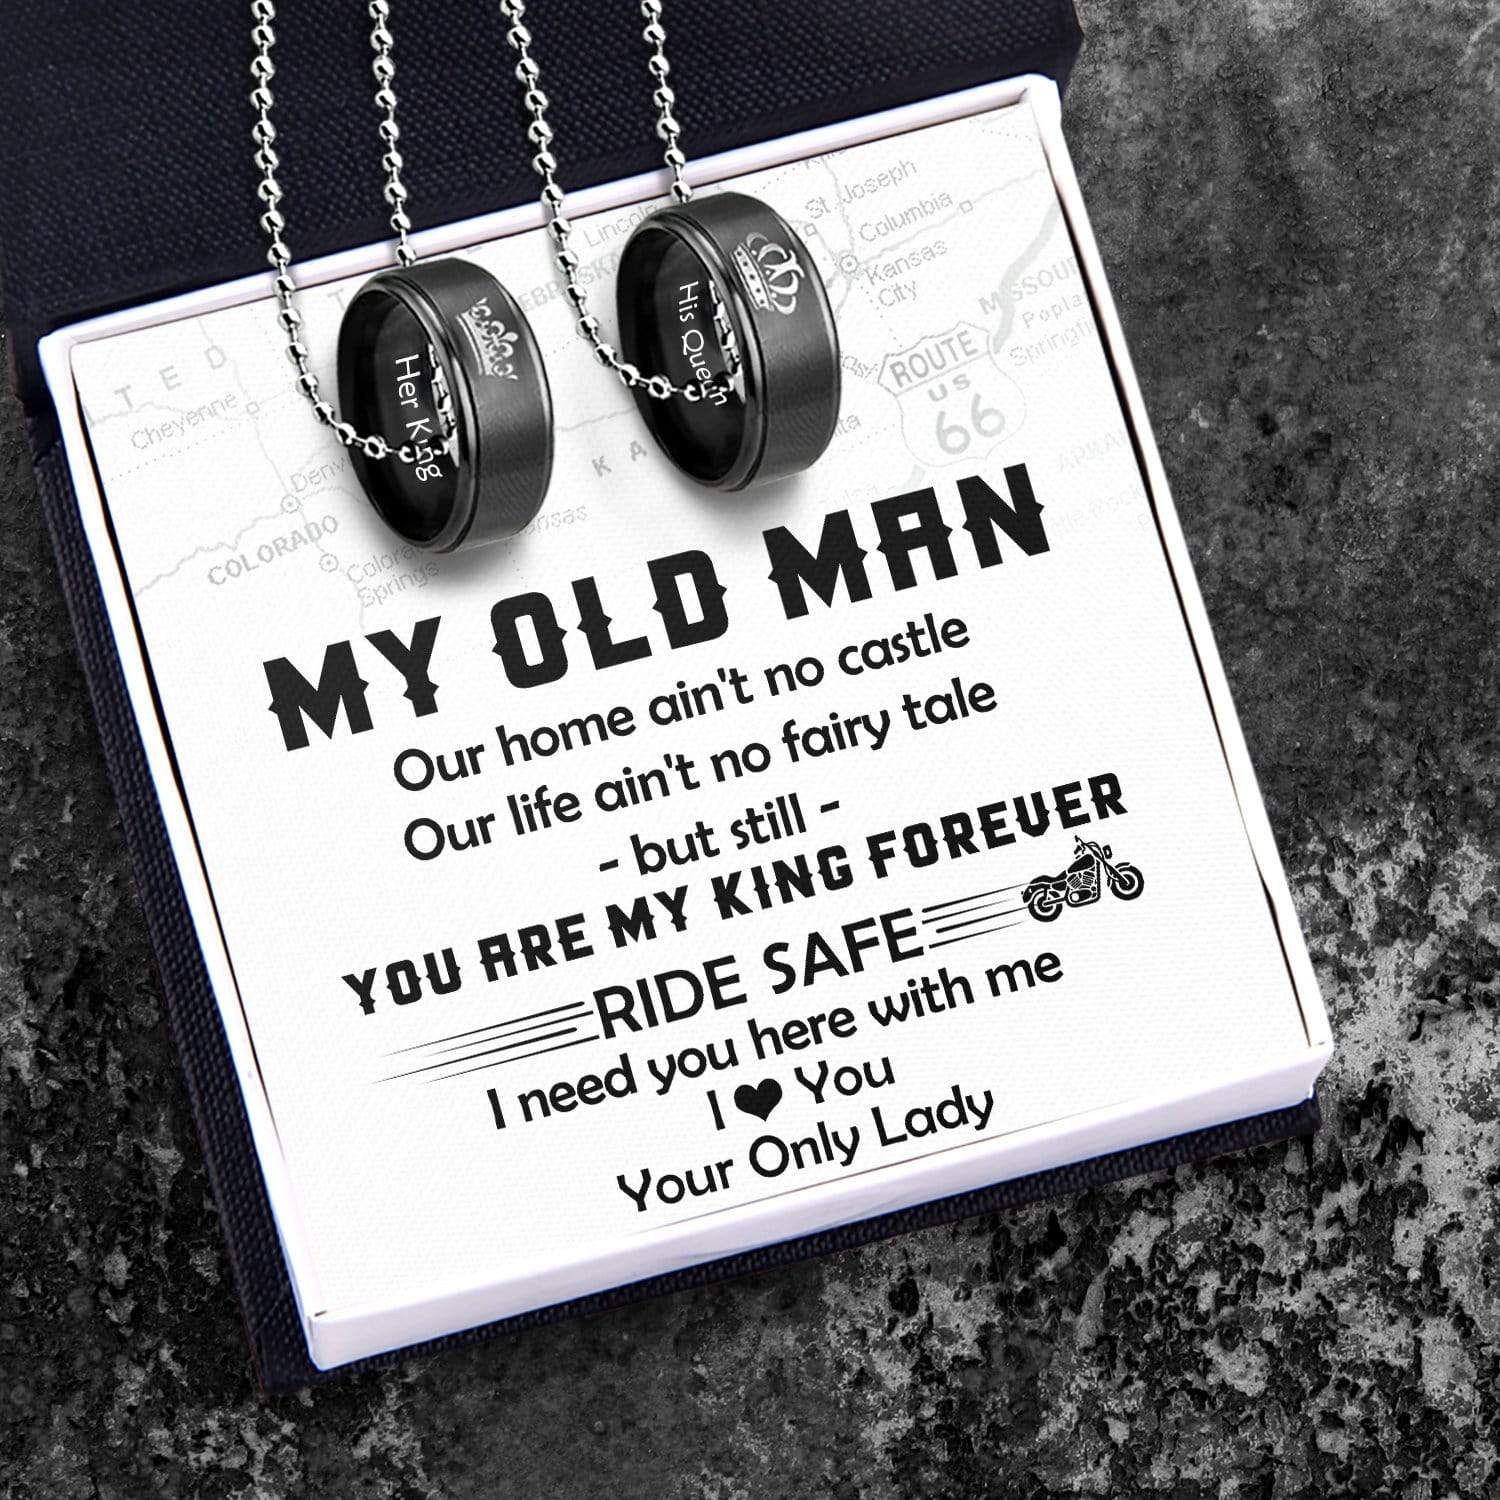 Couple Pendant Necklaces - Biker - To My Man - You Are My King Forever - Gnw26061